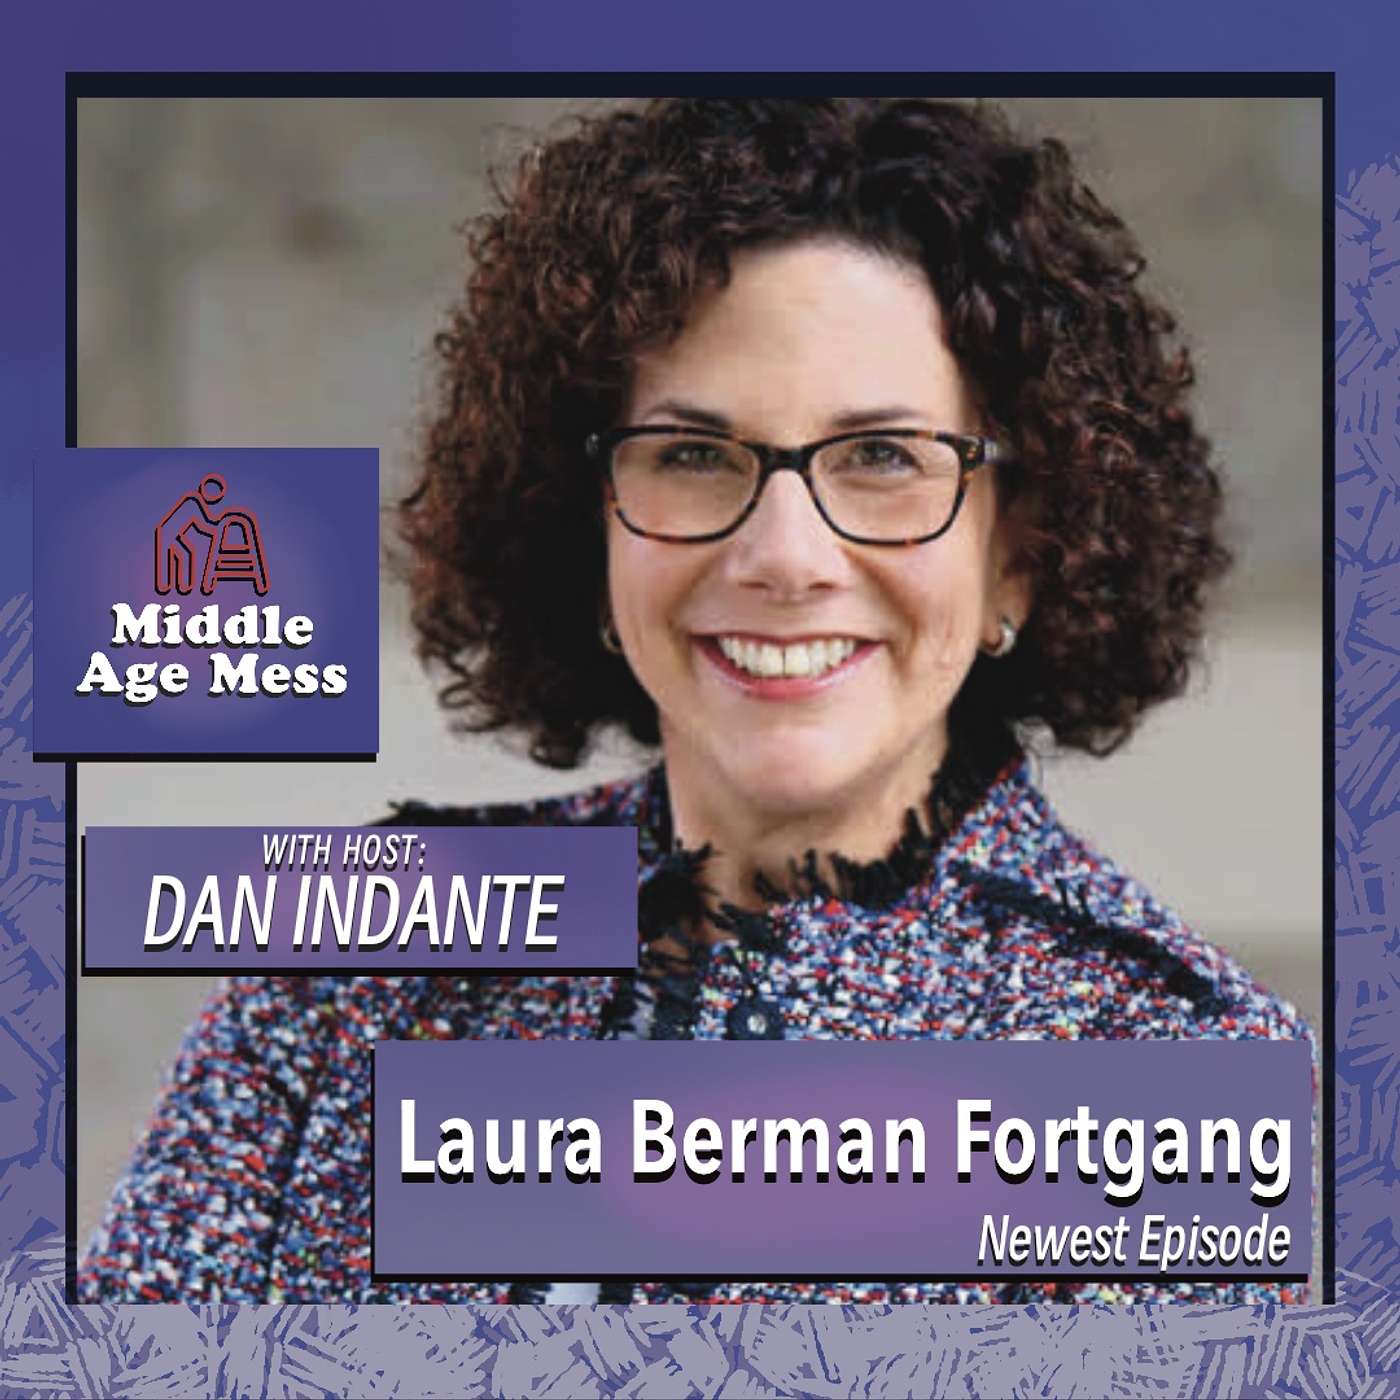 Middle Age Mess, Episode 7 - Laura Berman Fortgang